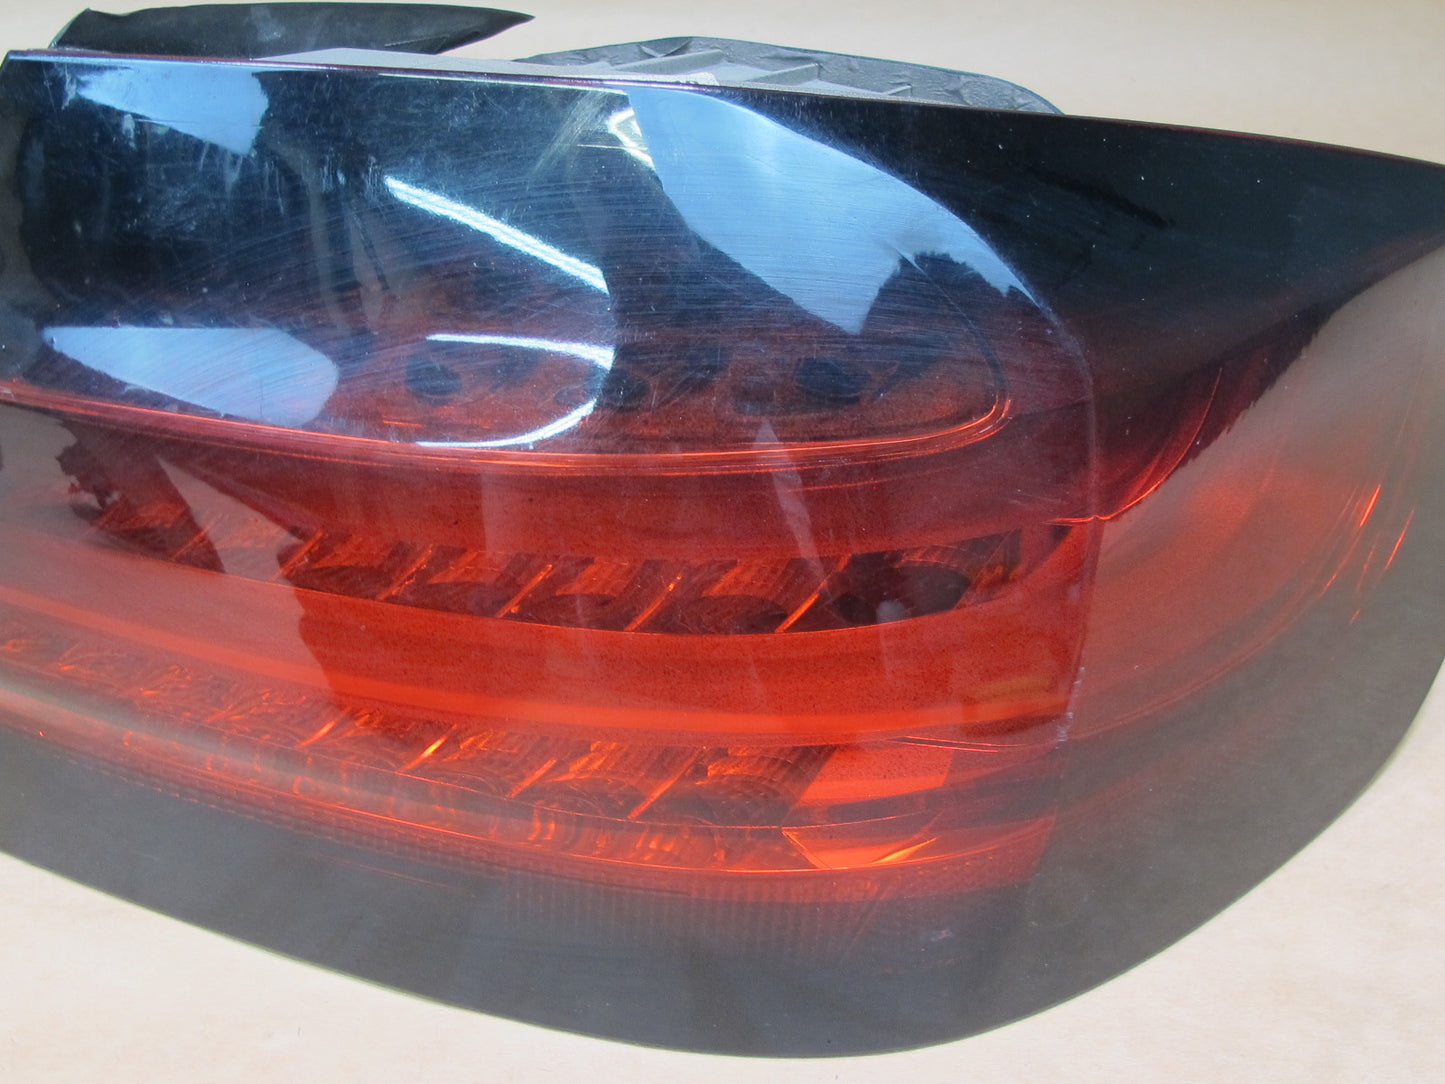 11-13 BMW E92 3-SERIES Coupe Set of 4 Rear Inner & Outer Tail Light Lamp OEM